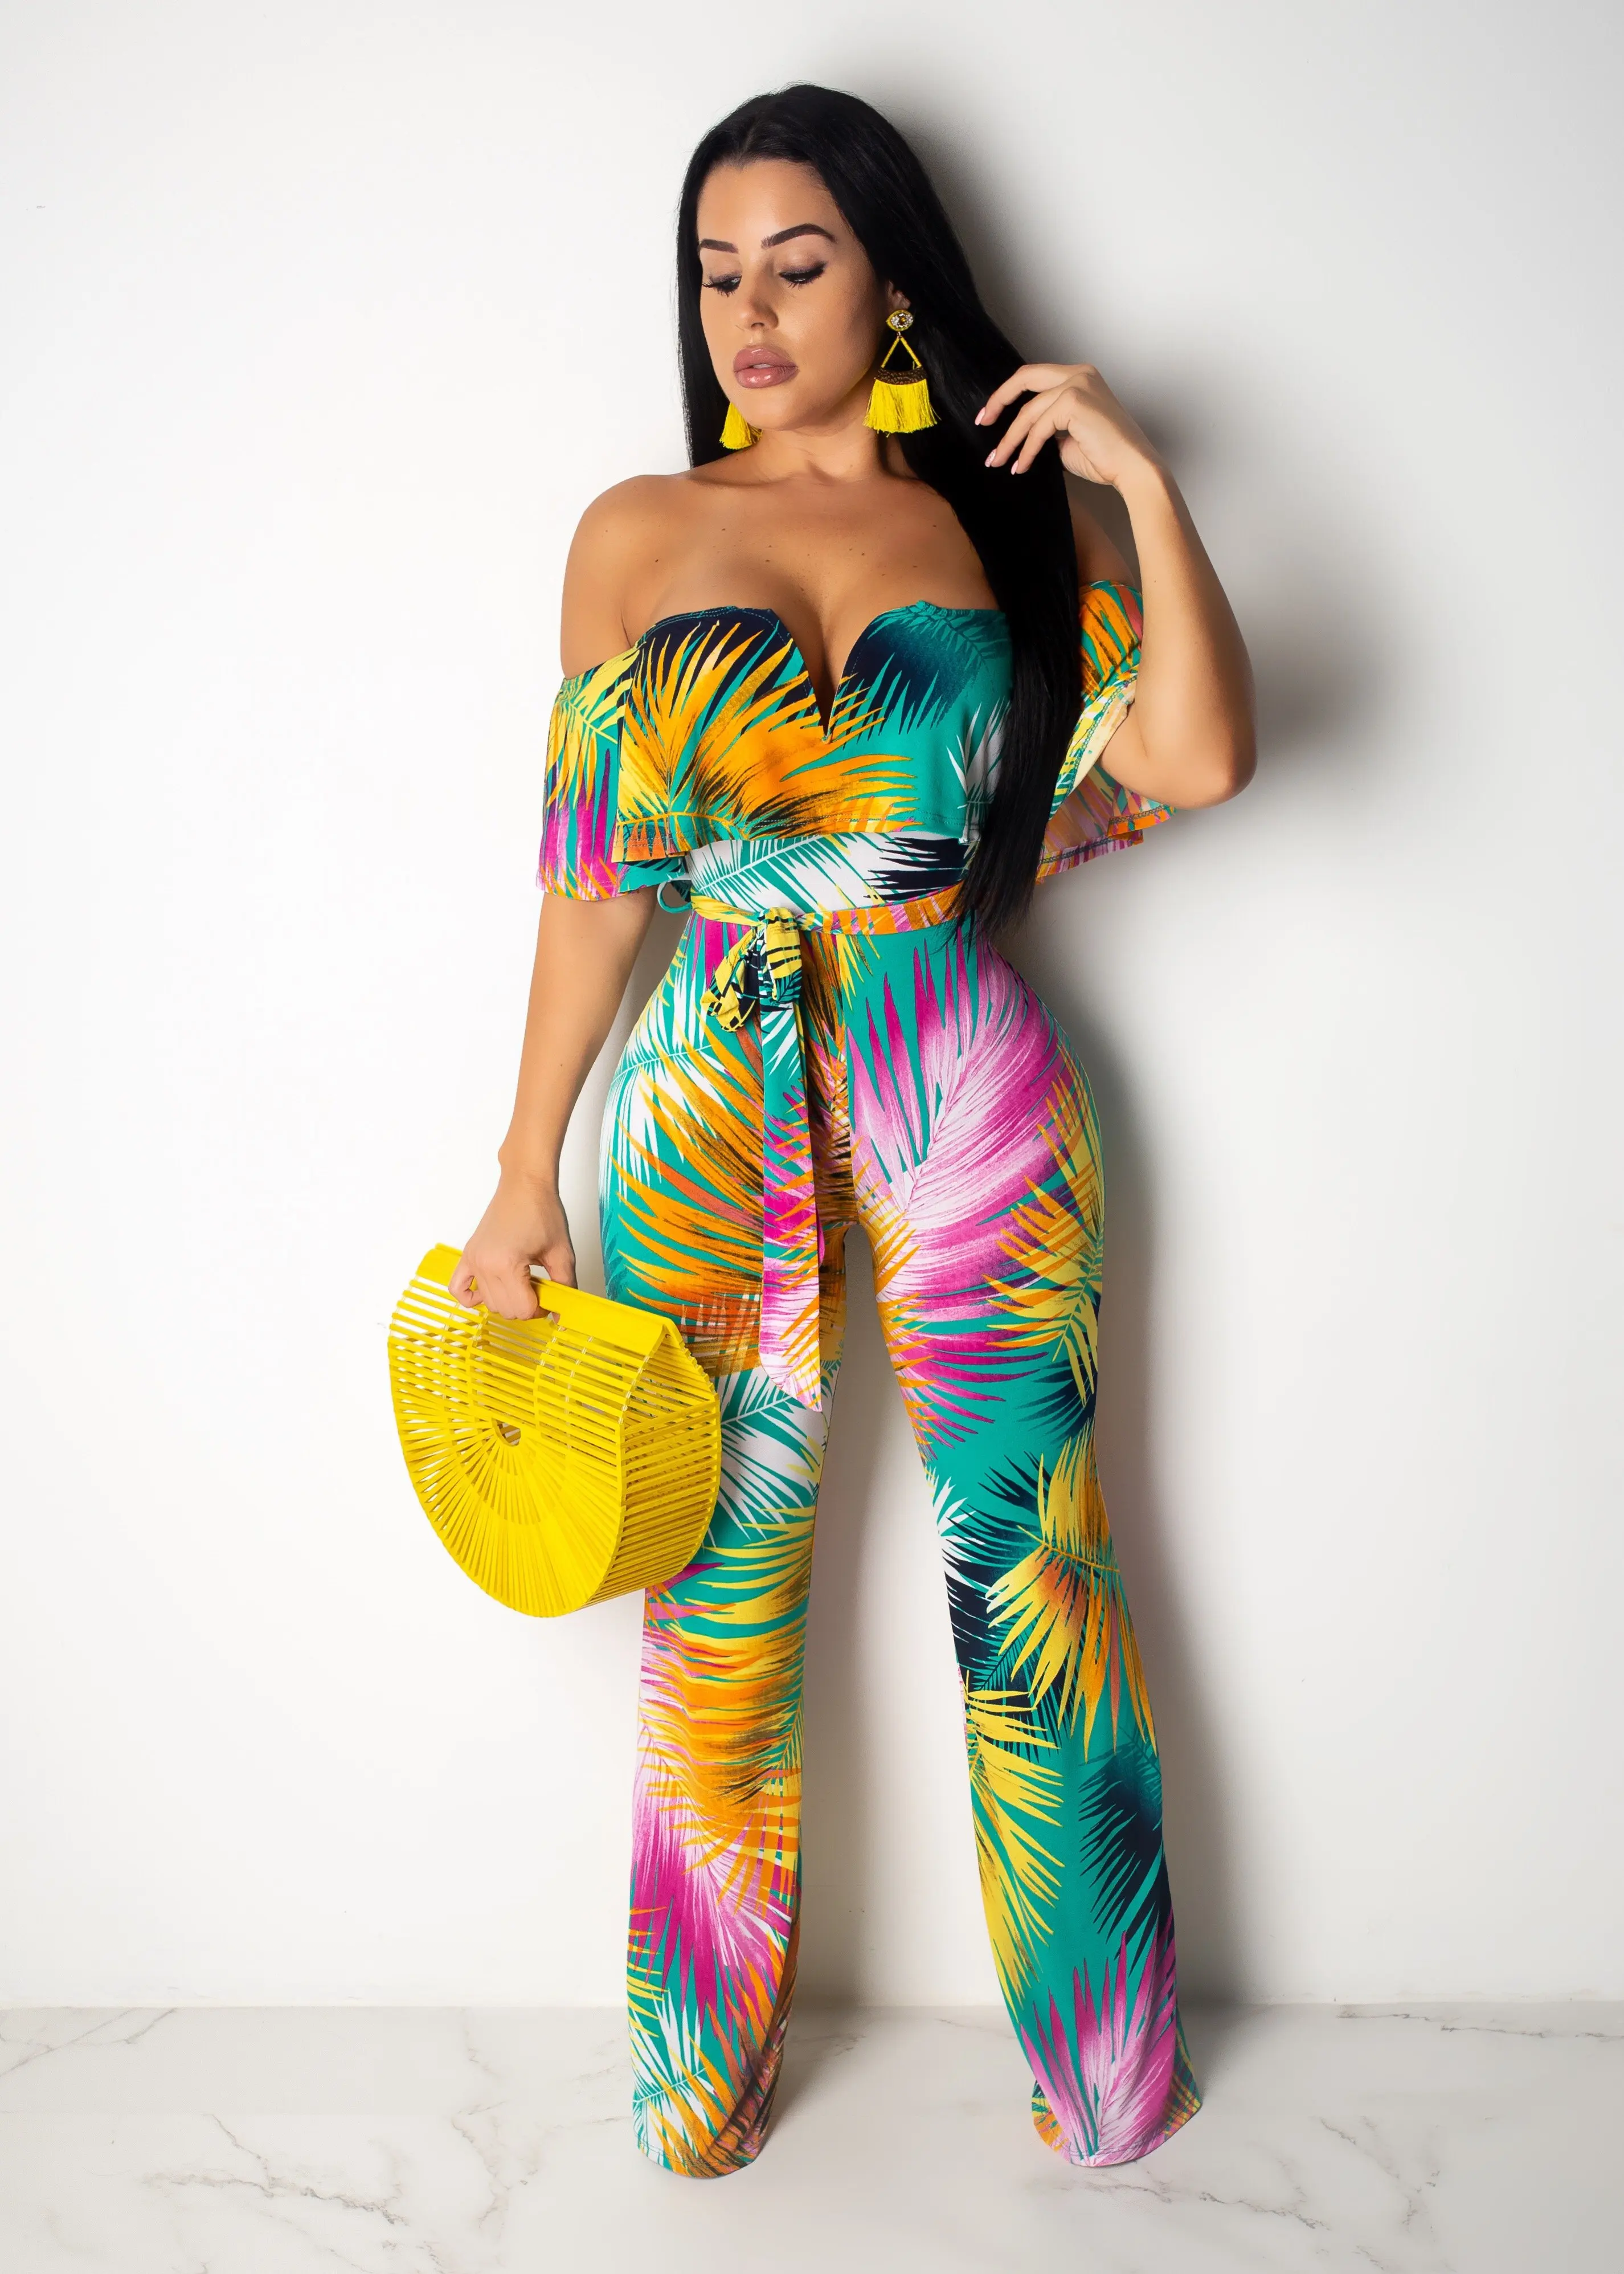 Boho Tropical Print Off Shoulder Ruffle Rompers Womens Beach Vacation Summer Playsuit 2019 Sexy Skinny Bodycon - Jumpsuits, Playsuits & Bodysuits - AliExpress